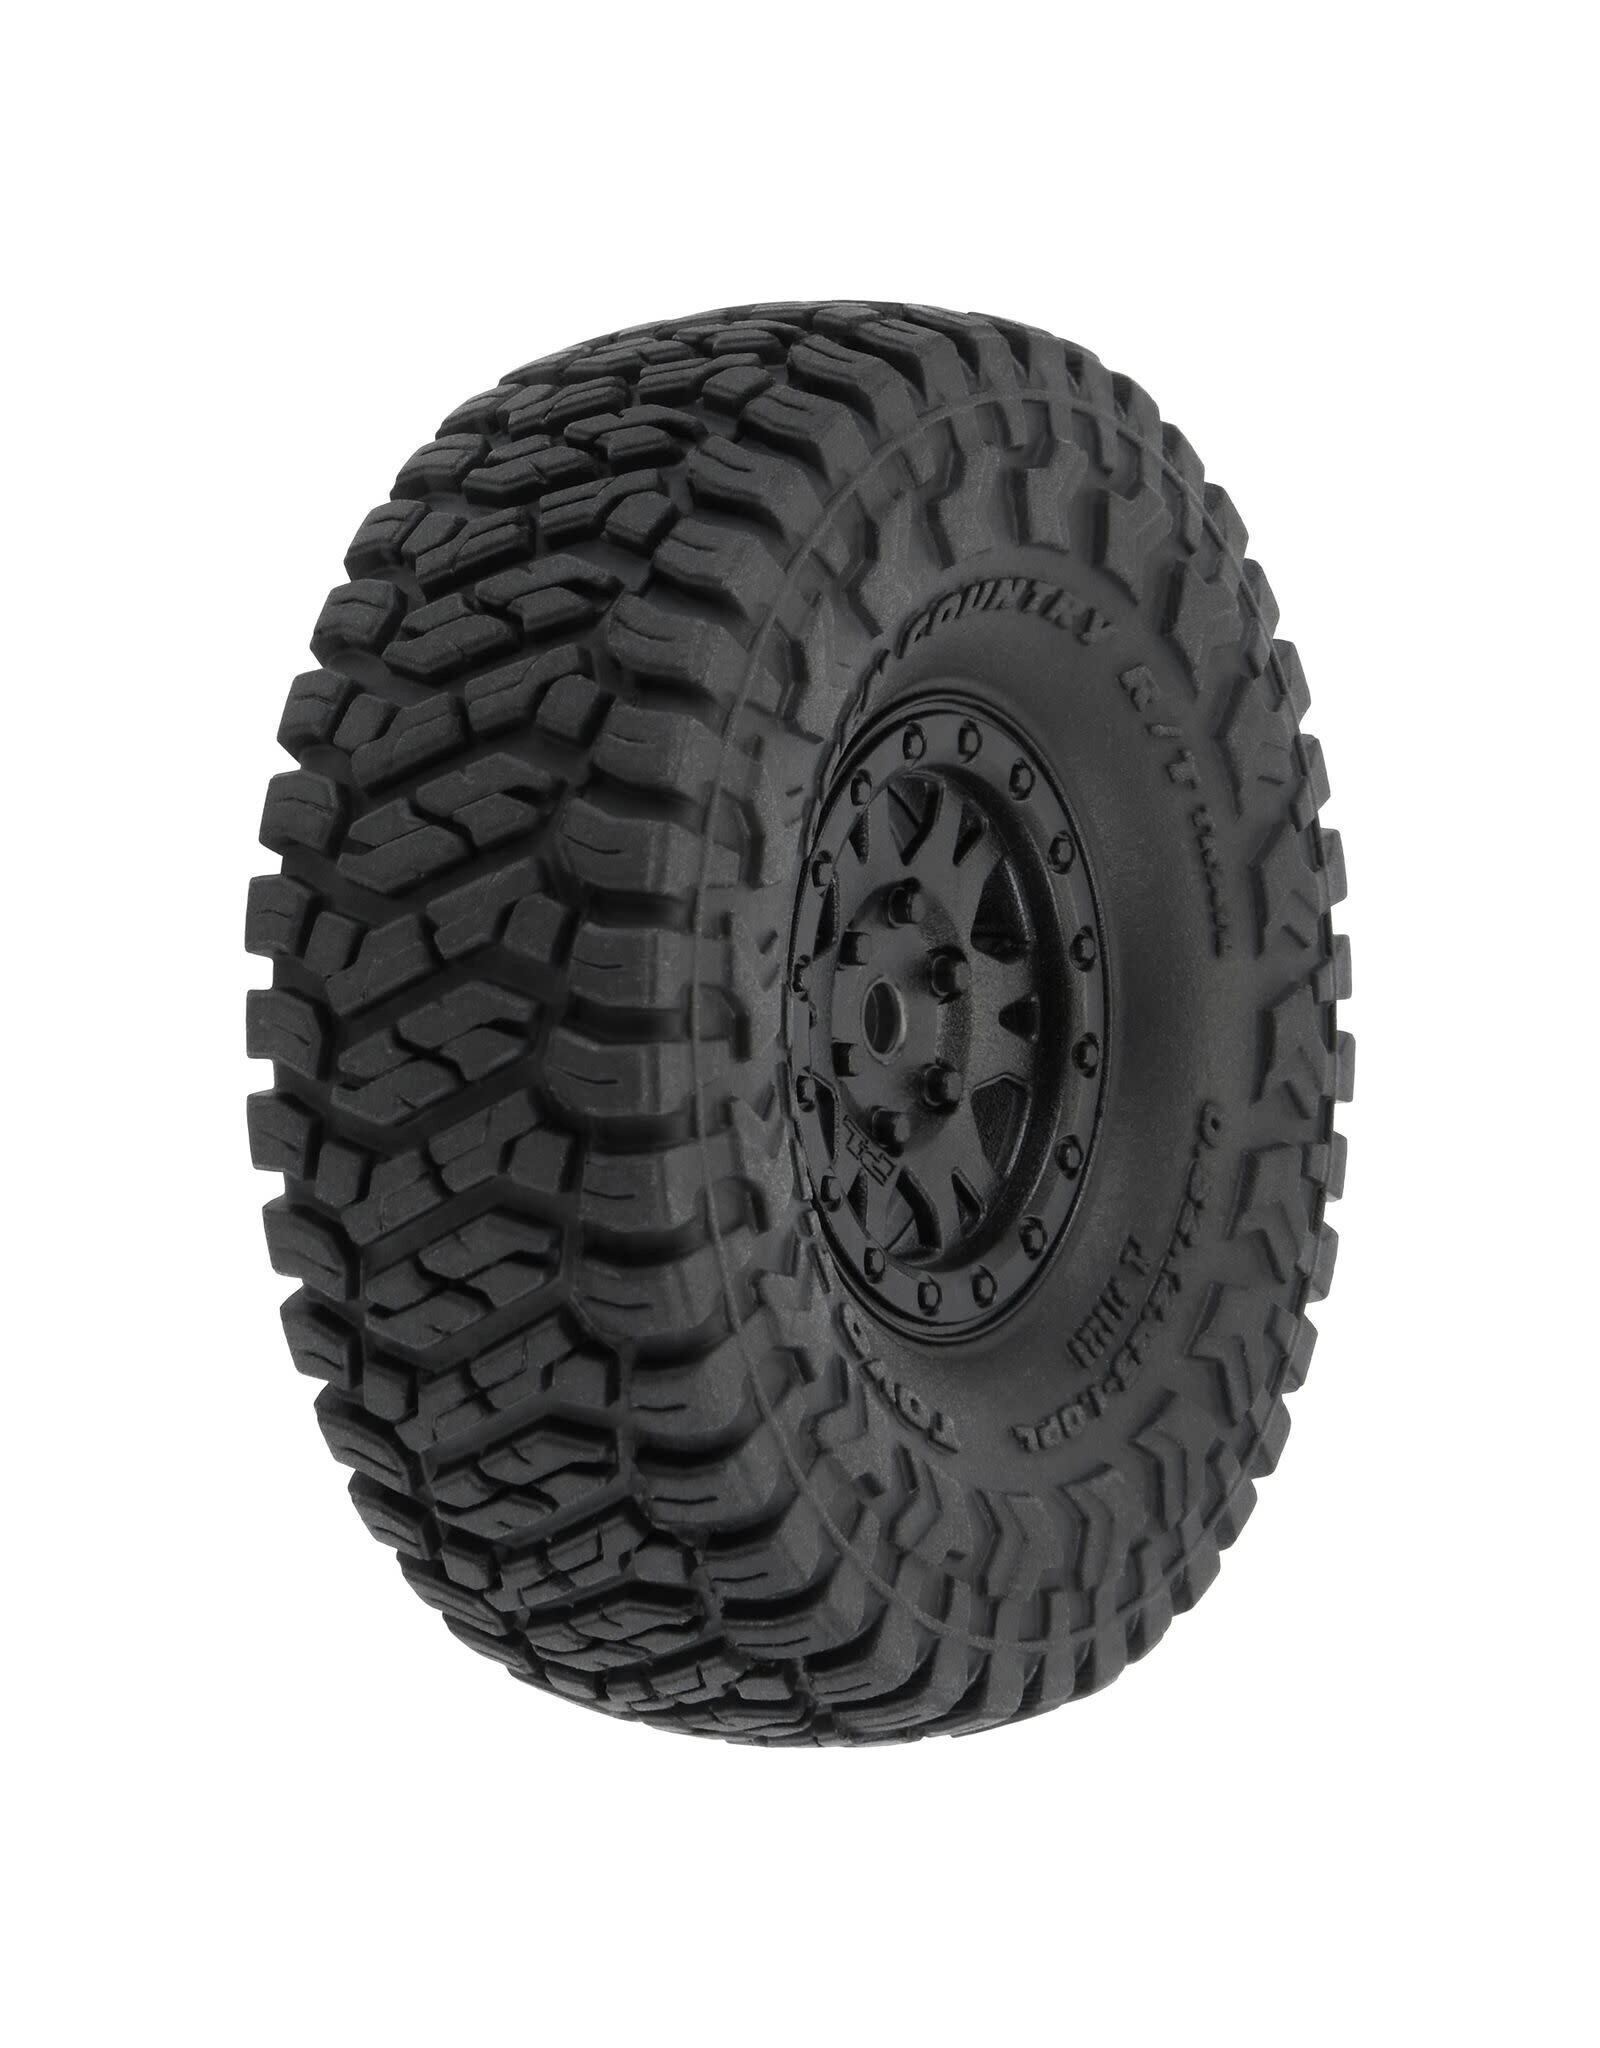 Pro-Line Toyo Open Country R/T Trail 1.0" Tires Mounted on Mini Impulse Black Internal Bead-Loc 7mm Hex Wheels (4) for SCX24 Front or Rear